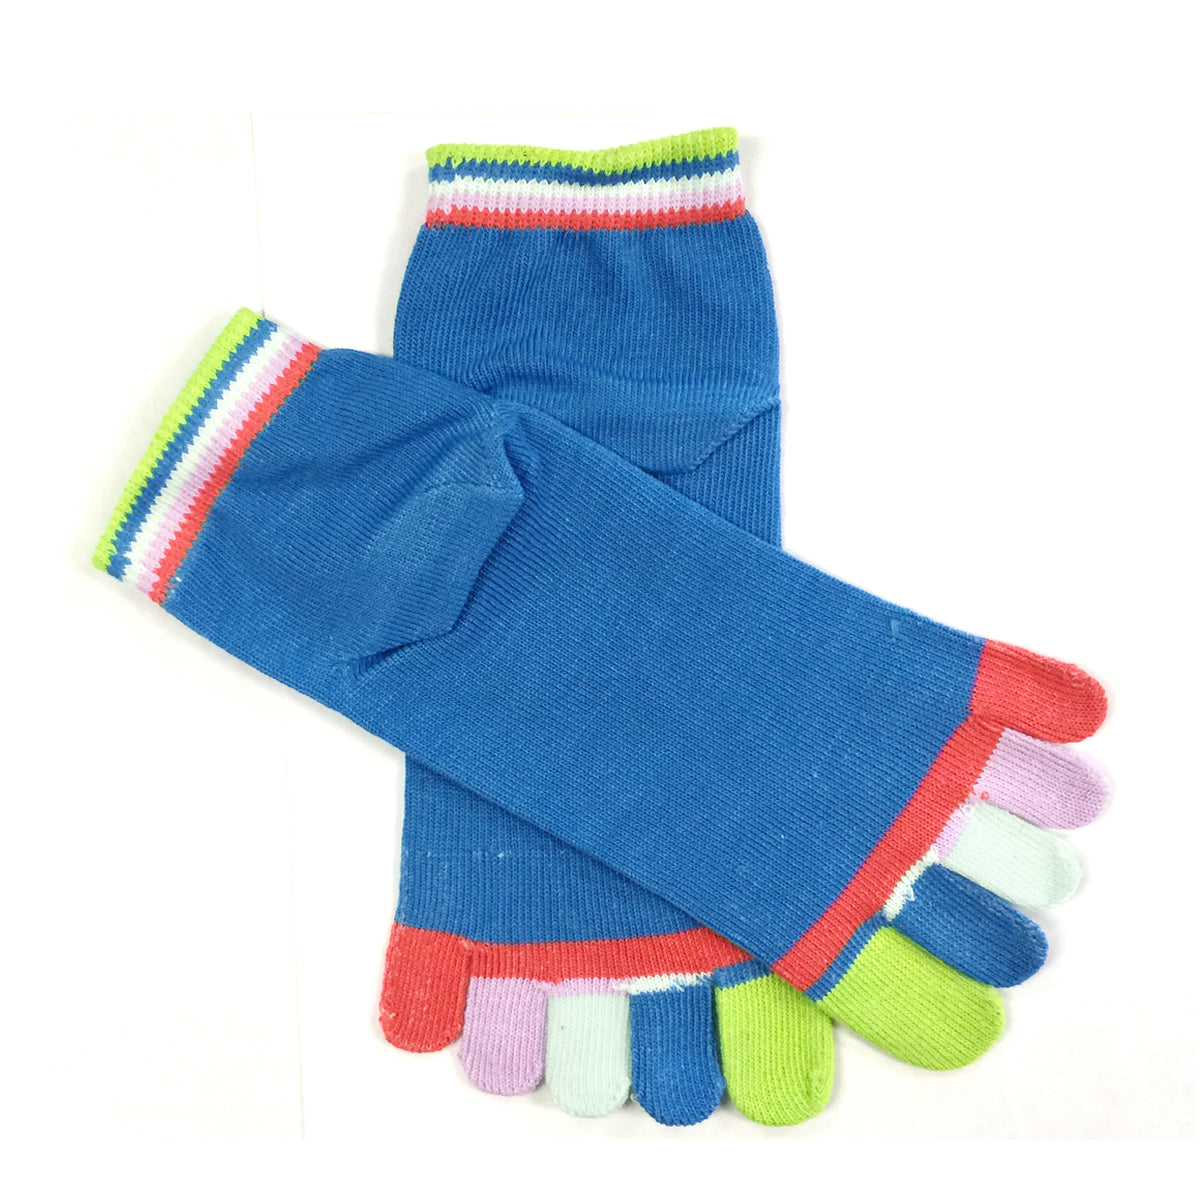 Wrapables Colorful Five Toe Socks Set of 5, Grey/Purple/White/Blue/Green